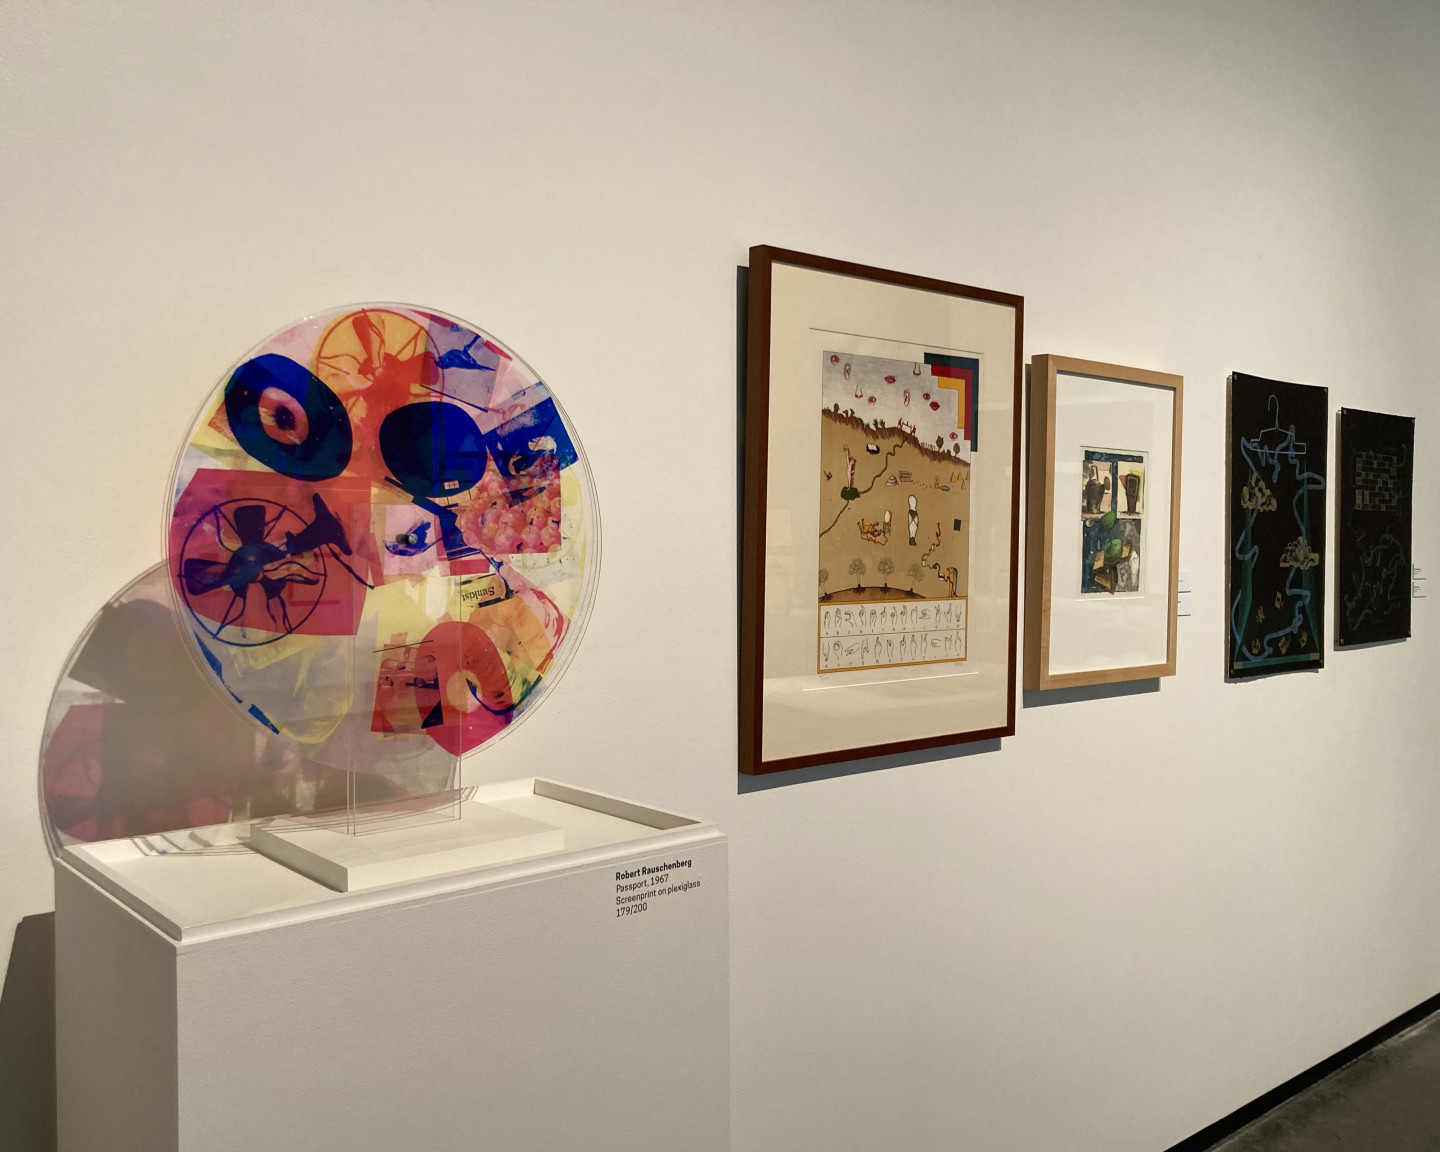 Wprls include  “Passport” by Robert Rauschenberg and the print “Historical Culture” by Jan Voss.